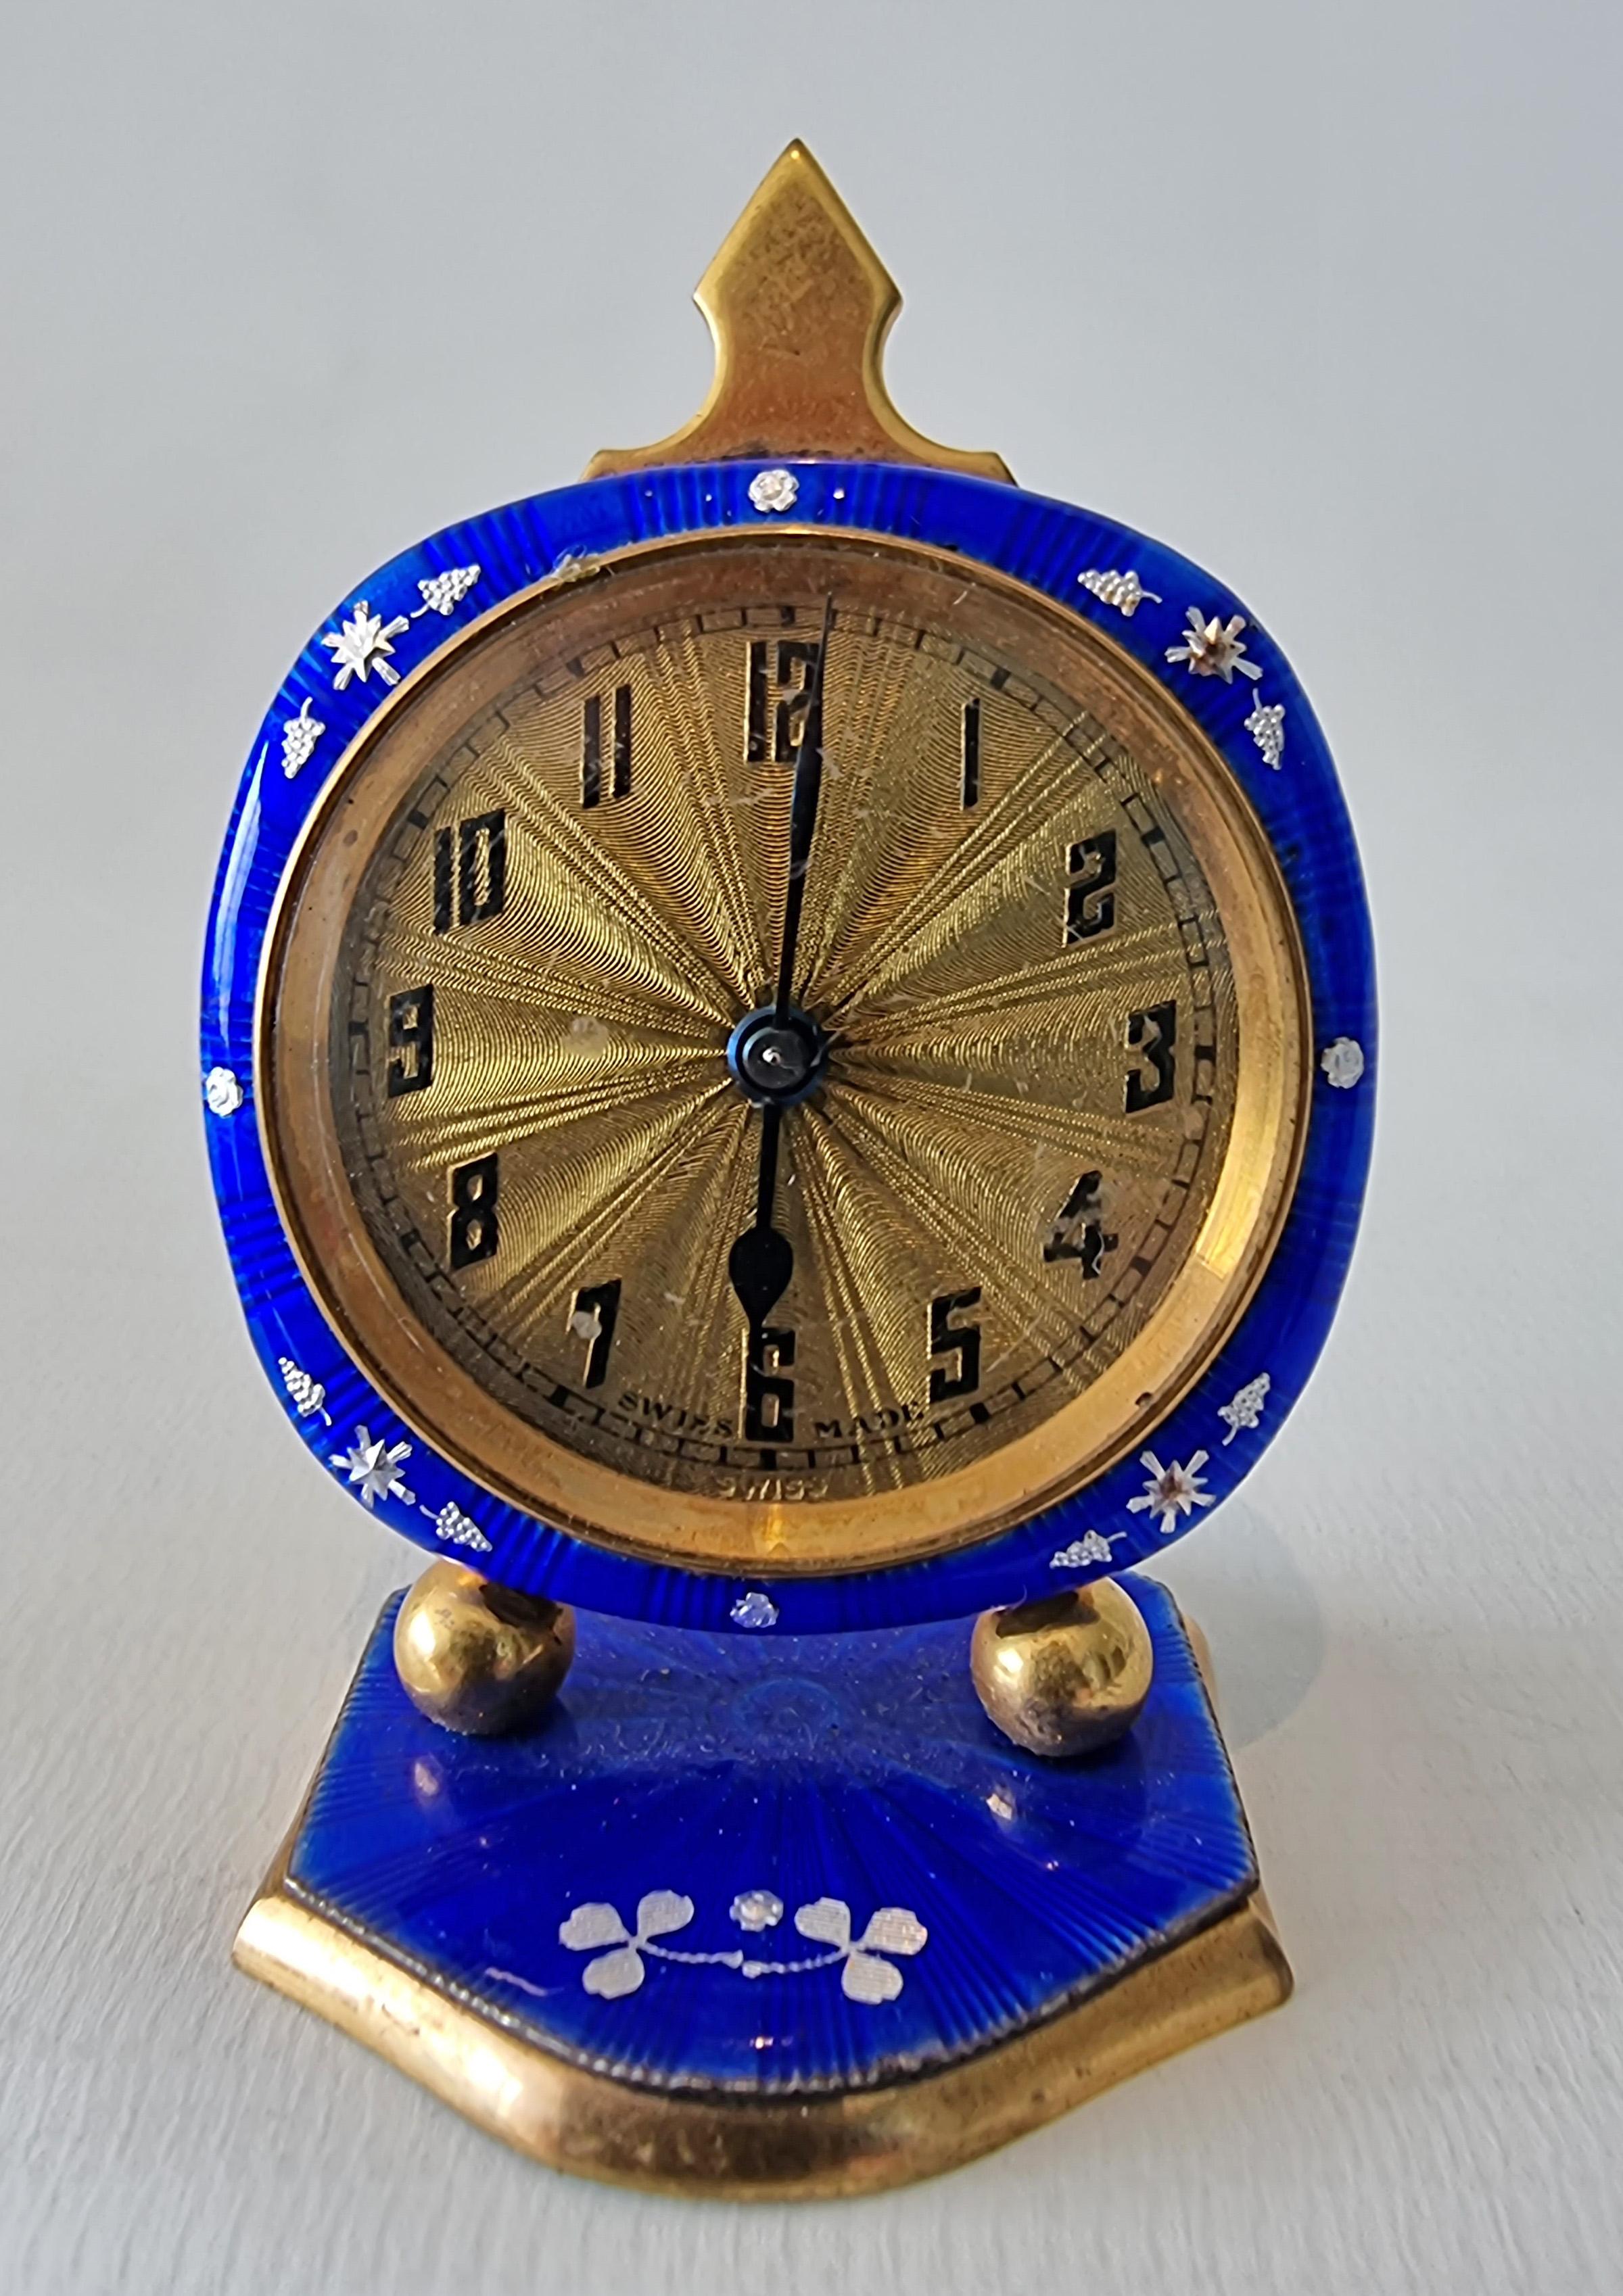 A small blue guilloche enamel gilt metel sub miniature boudoir clock. With overpainted silver flowers on the engine turned enamel, the gilt dial engine turned with starburst effect and arabic numerals, marked swiss made below 6 o clock. 30 hour